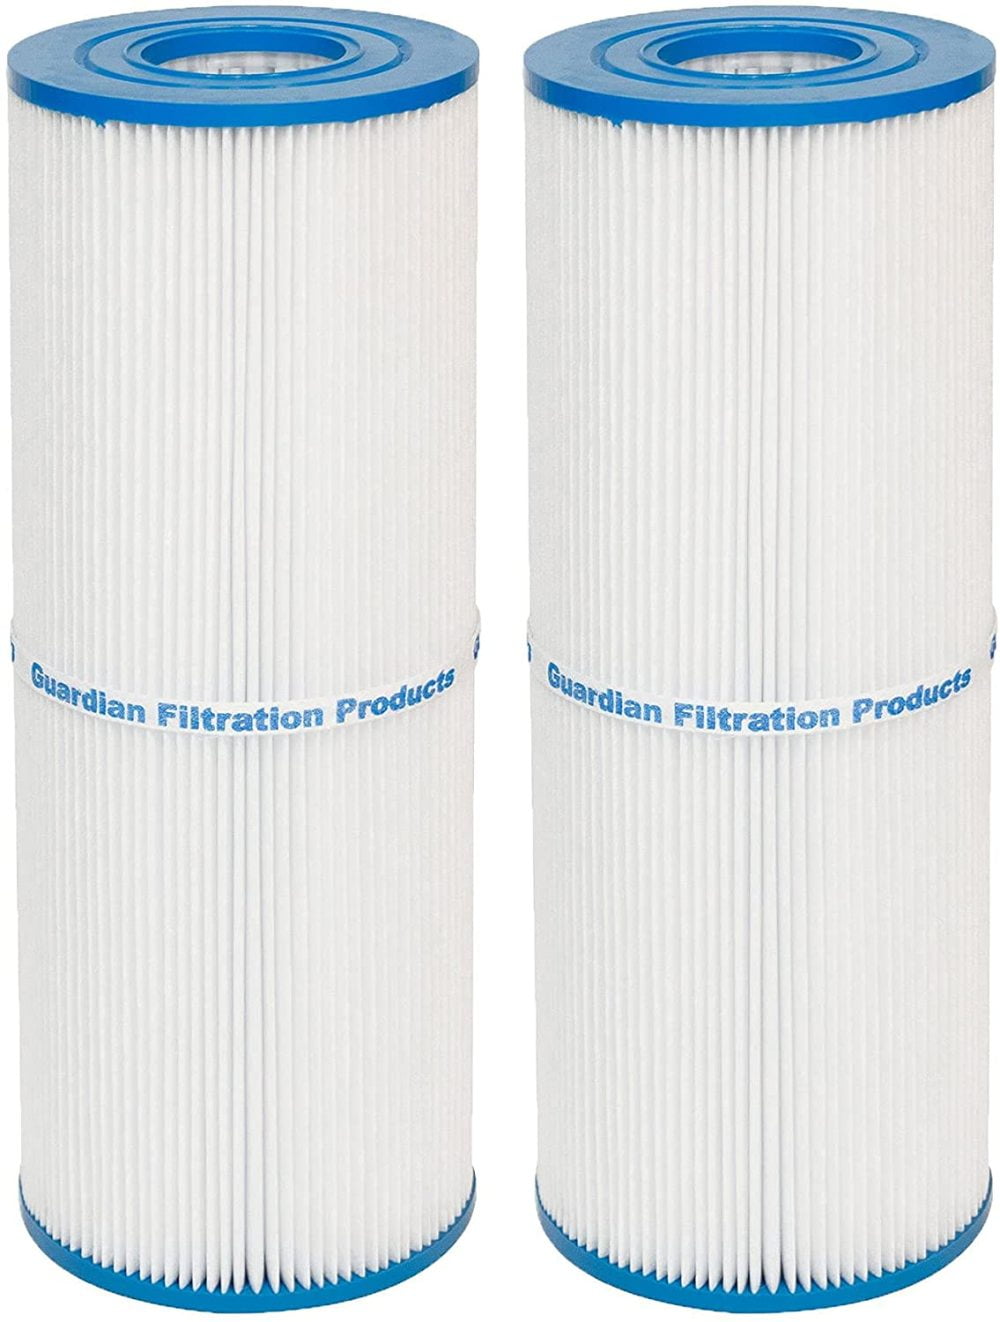 4 Pack Pool Spa Filters for Cartridge Pleatco PRB25-IN Replaces Filbur FC-2375 